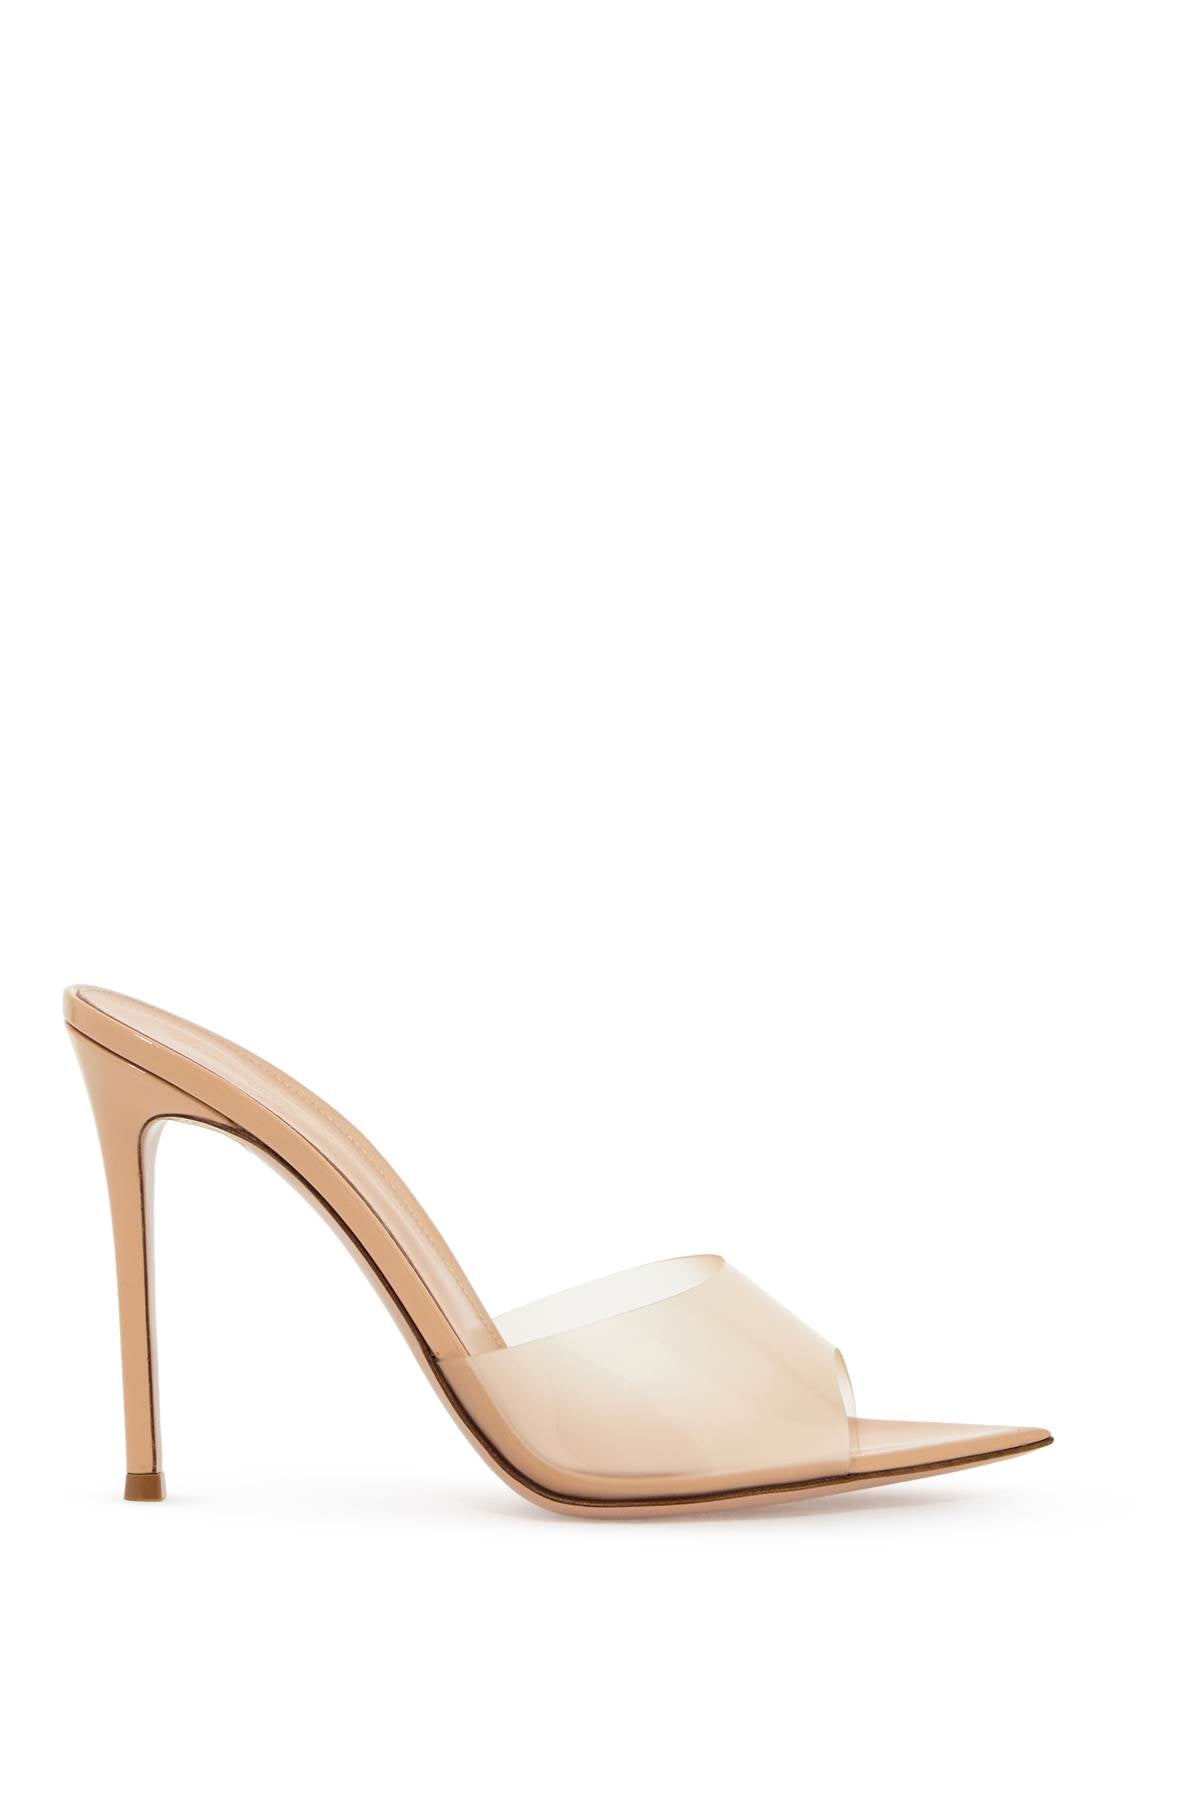 GIANVITO ROSSI Stunning Patent Leather Sandals for Women